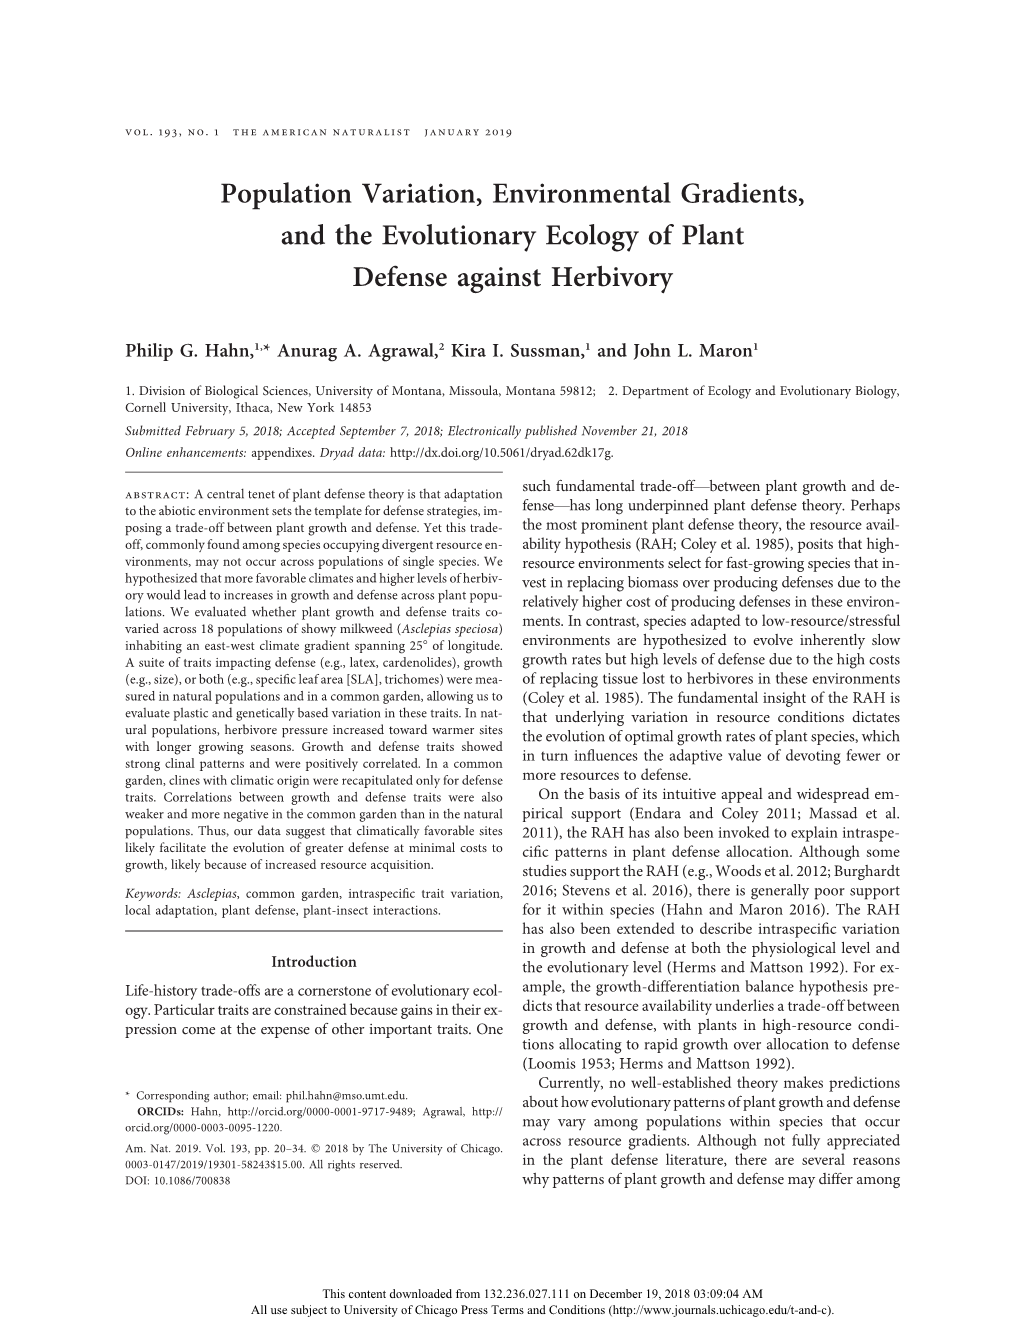 Population Variation, Environmental Gradients, and the Evolutionary Ecology of Plant Defense Against Herbivory